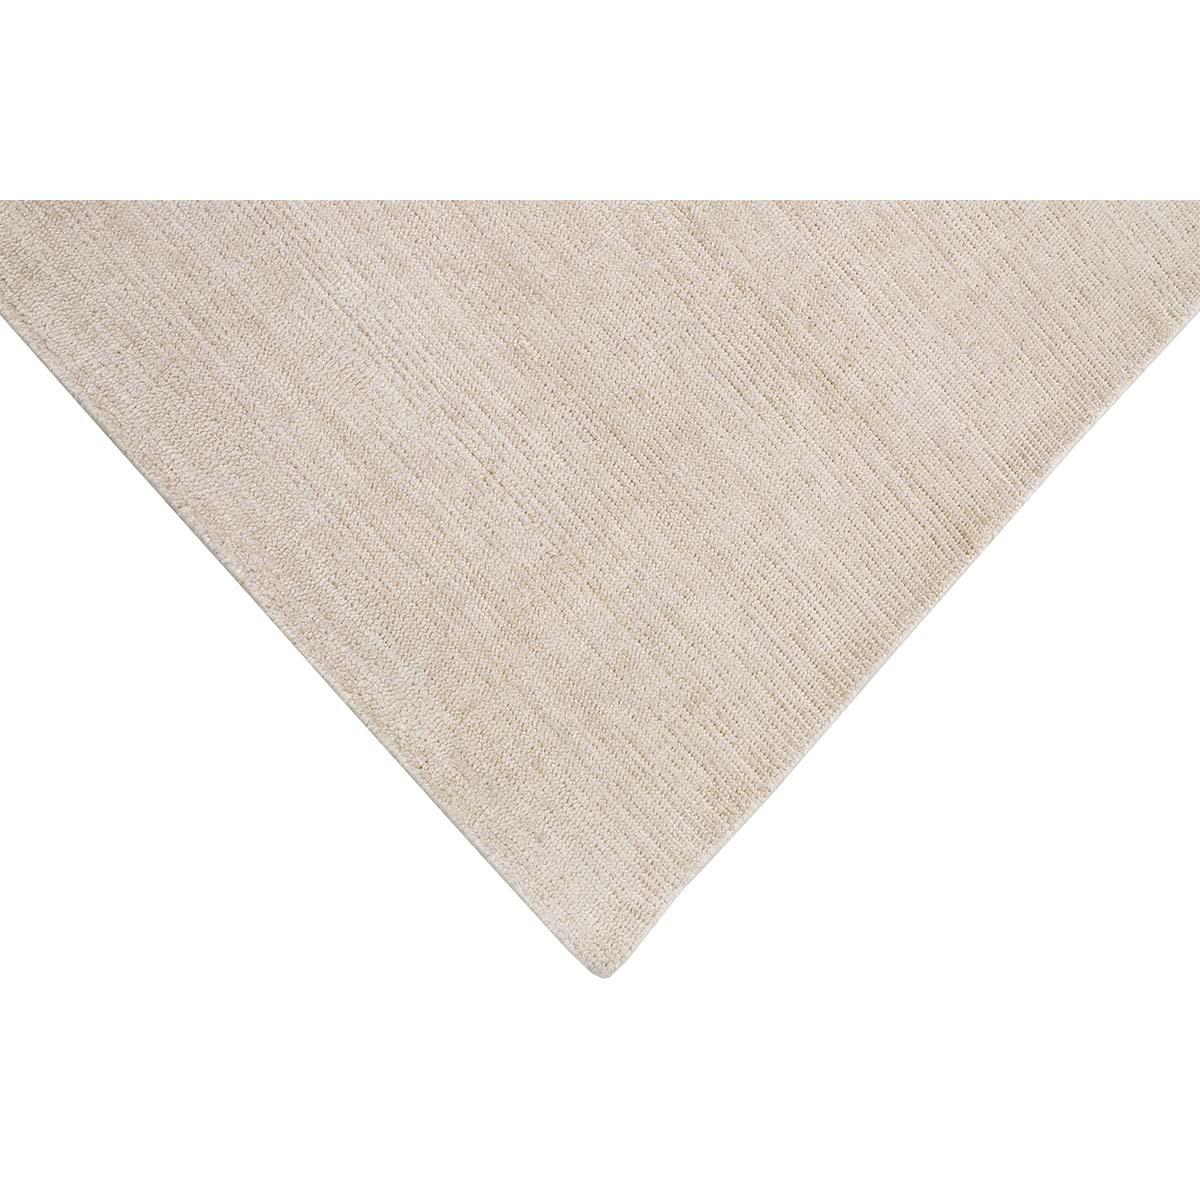 Indian Luxurious Hand Loomed Cream Area Rug For Sale